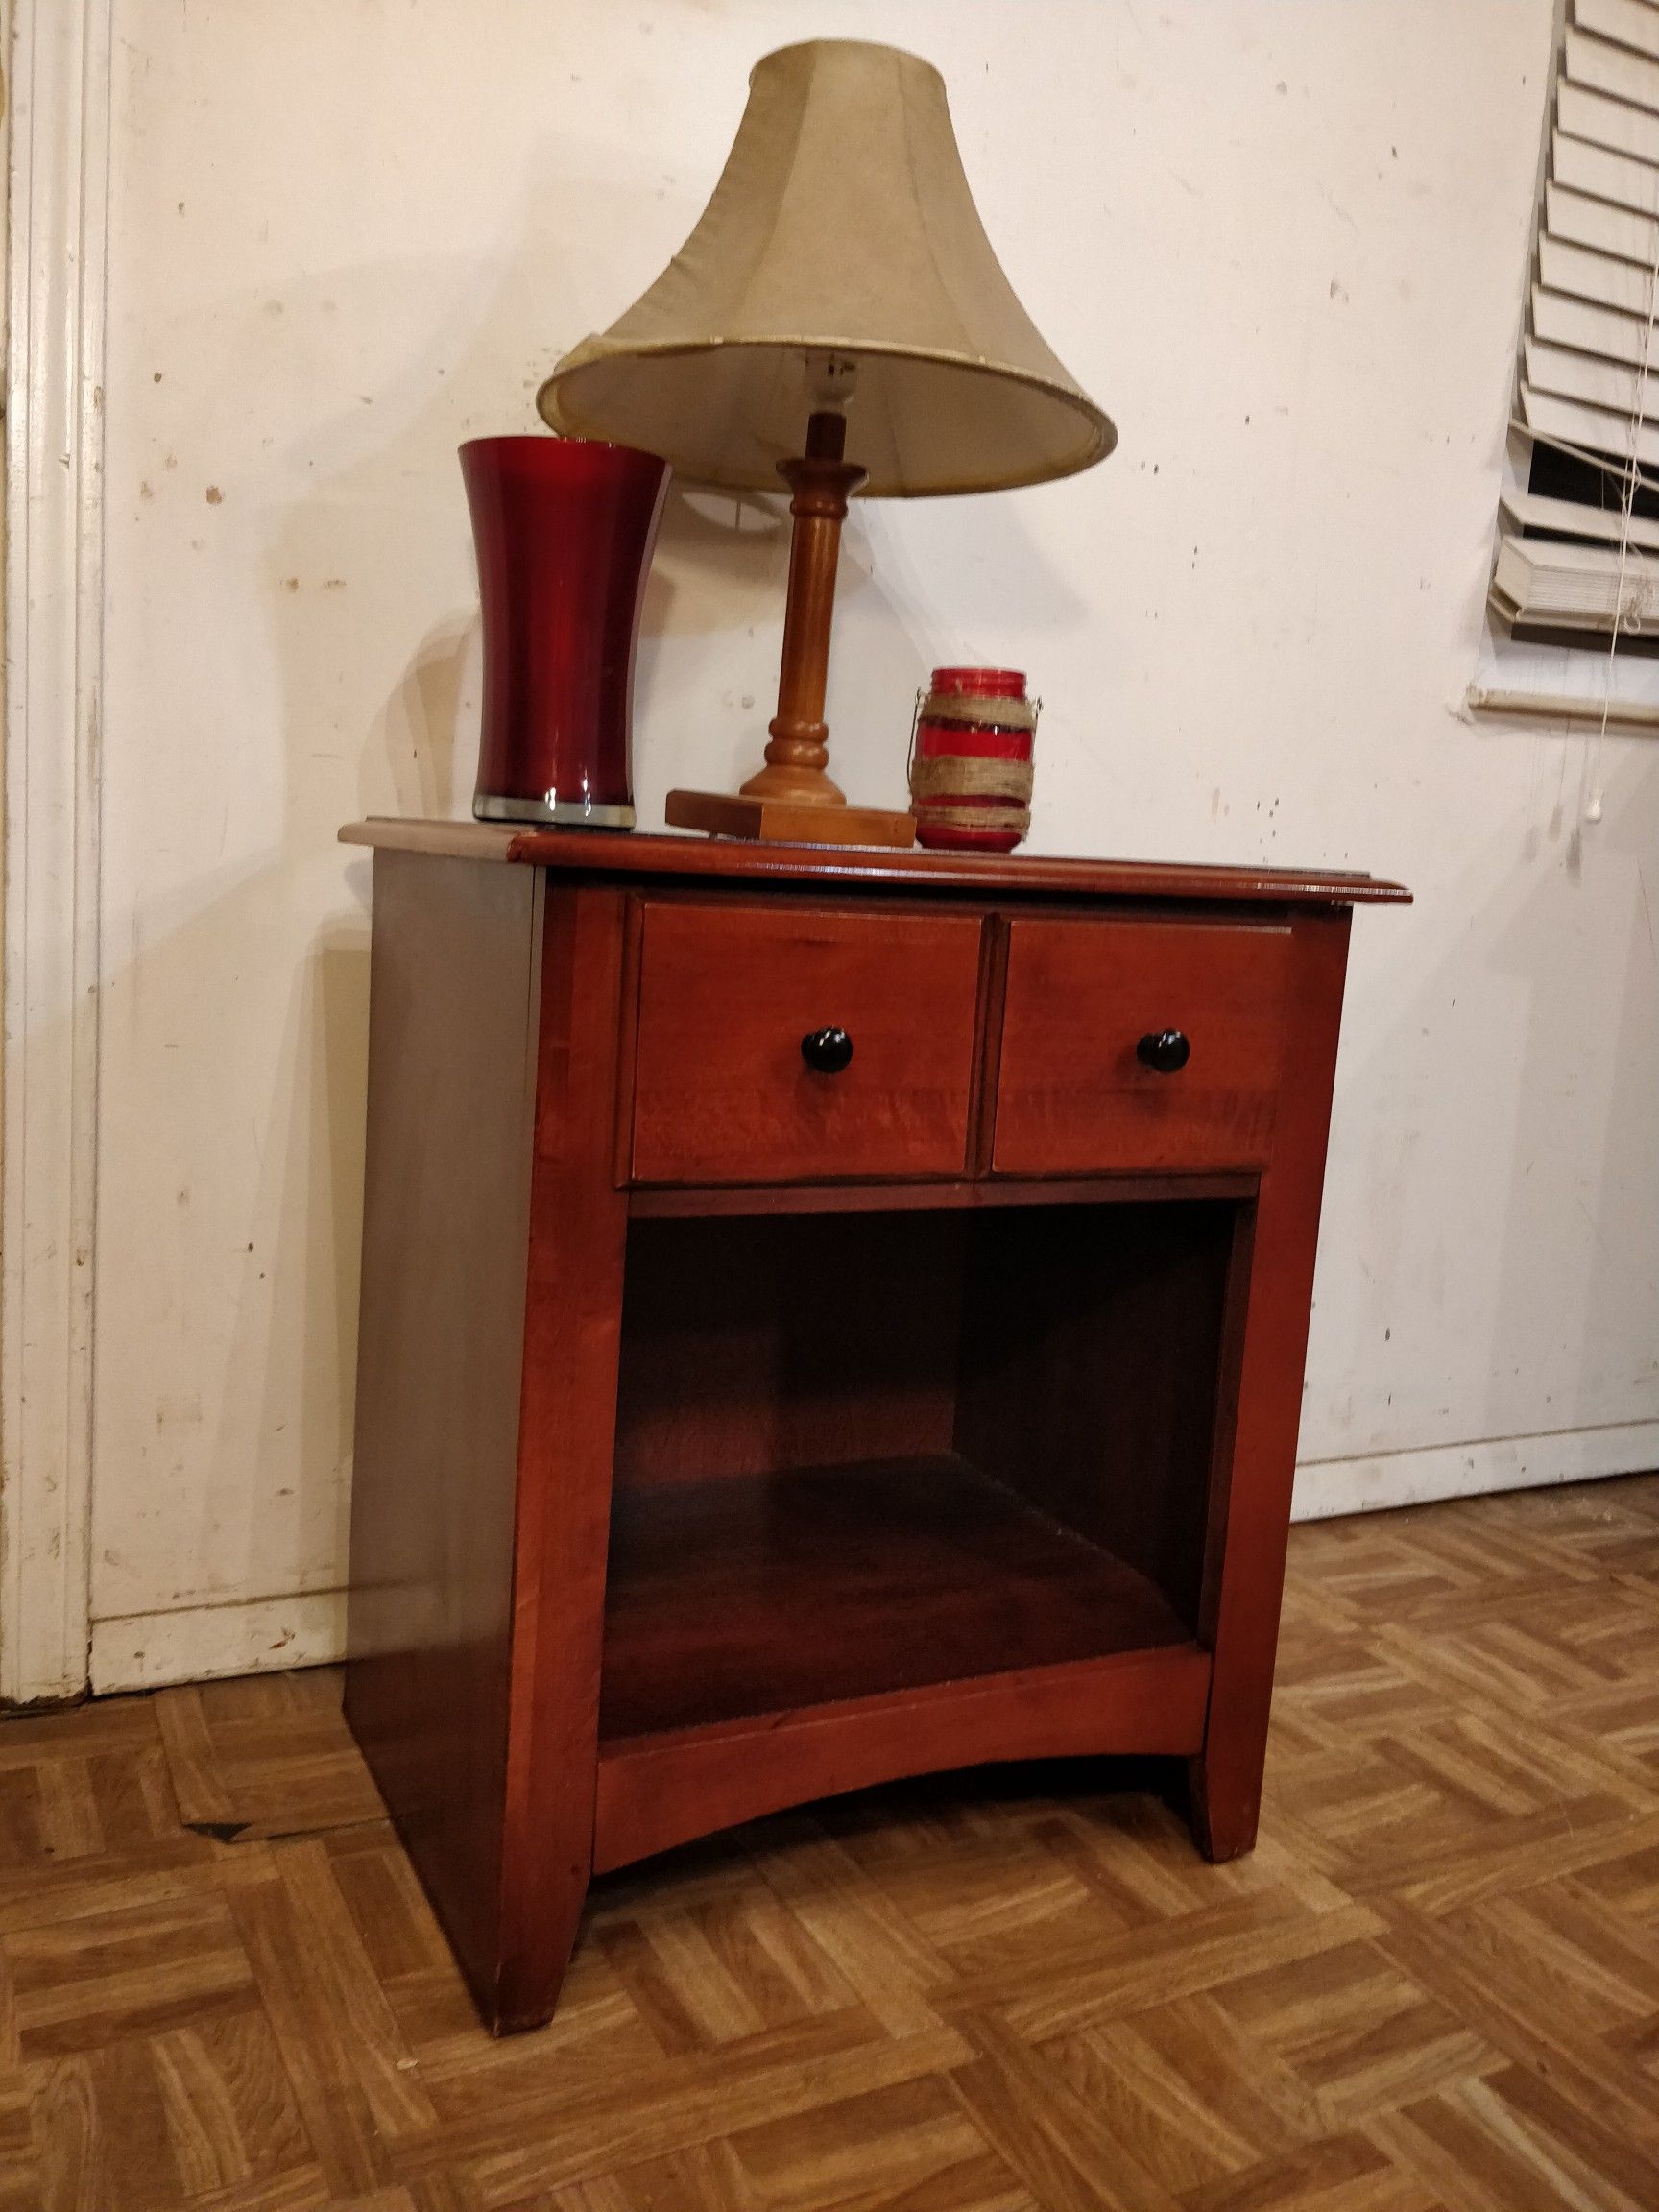 Nice wooden night stand in great condition, made in USA, all drawers working well. L22"*W16"*H25"